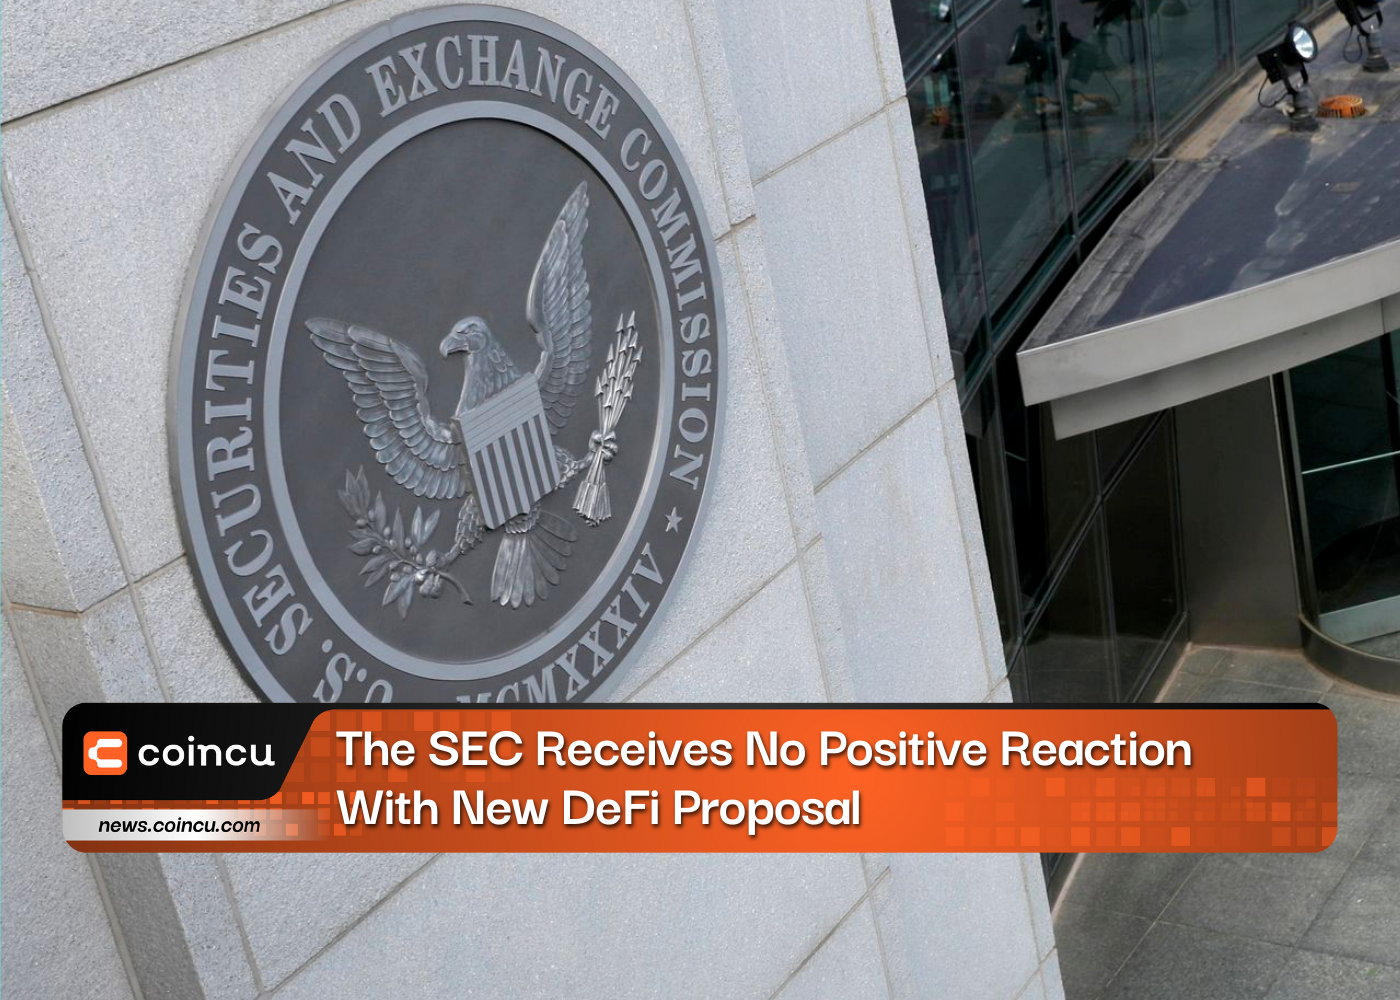 The SEC Receives No Positive Reaction With New DeFi Proposal